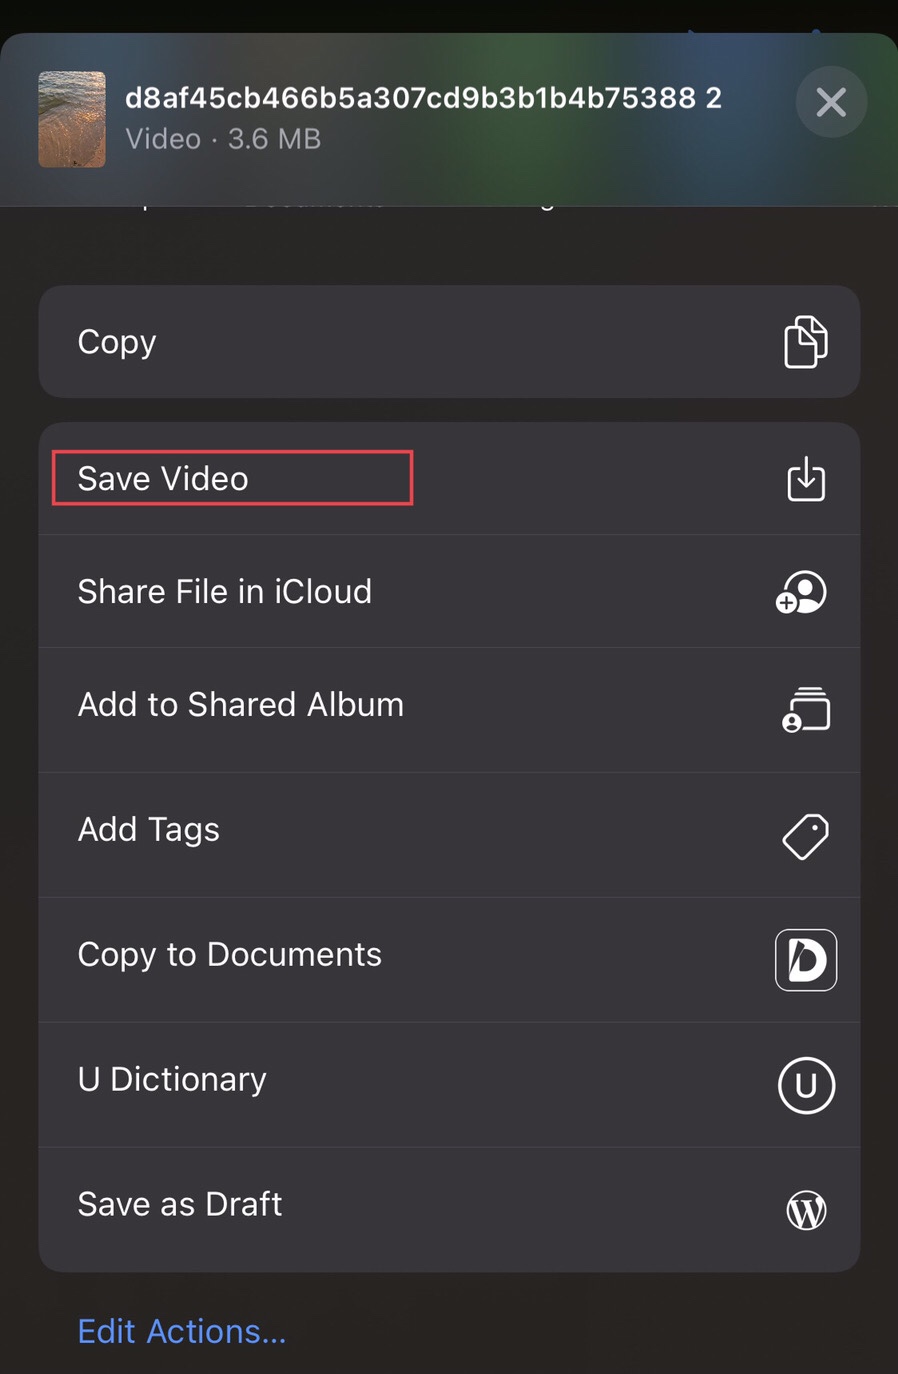 Then tap on the “Save Video” to save it in your gallery.